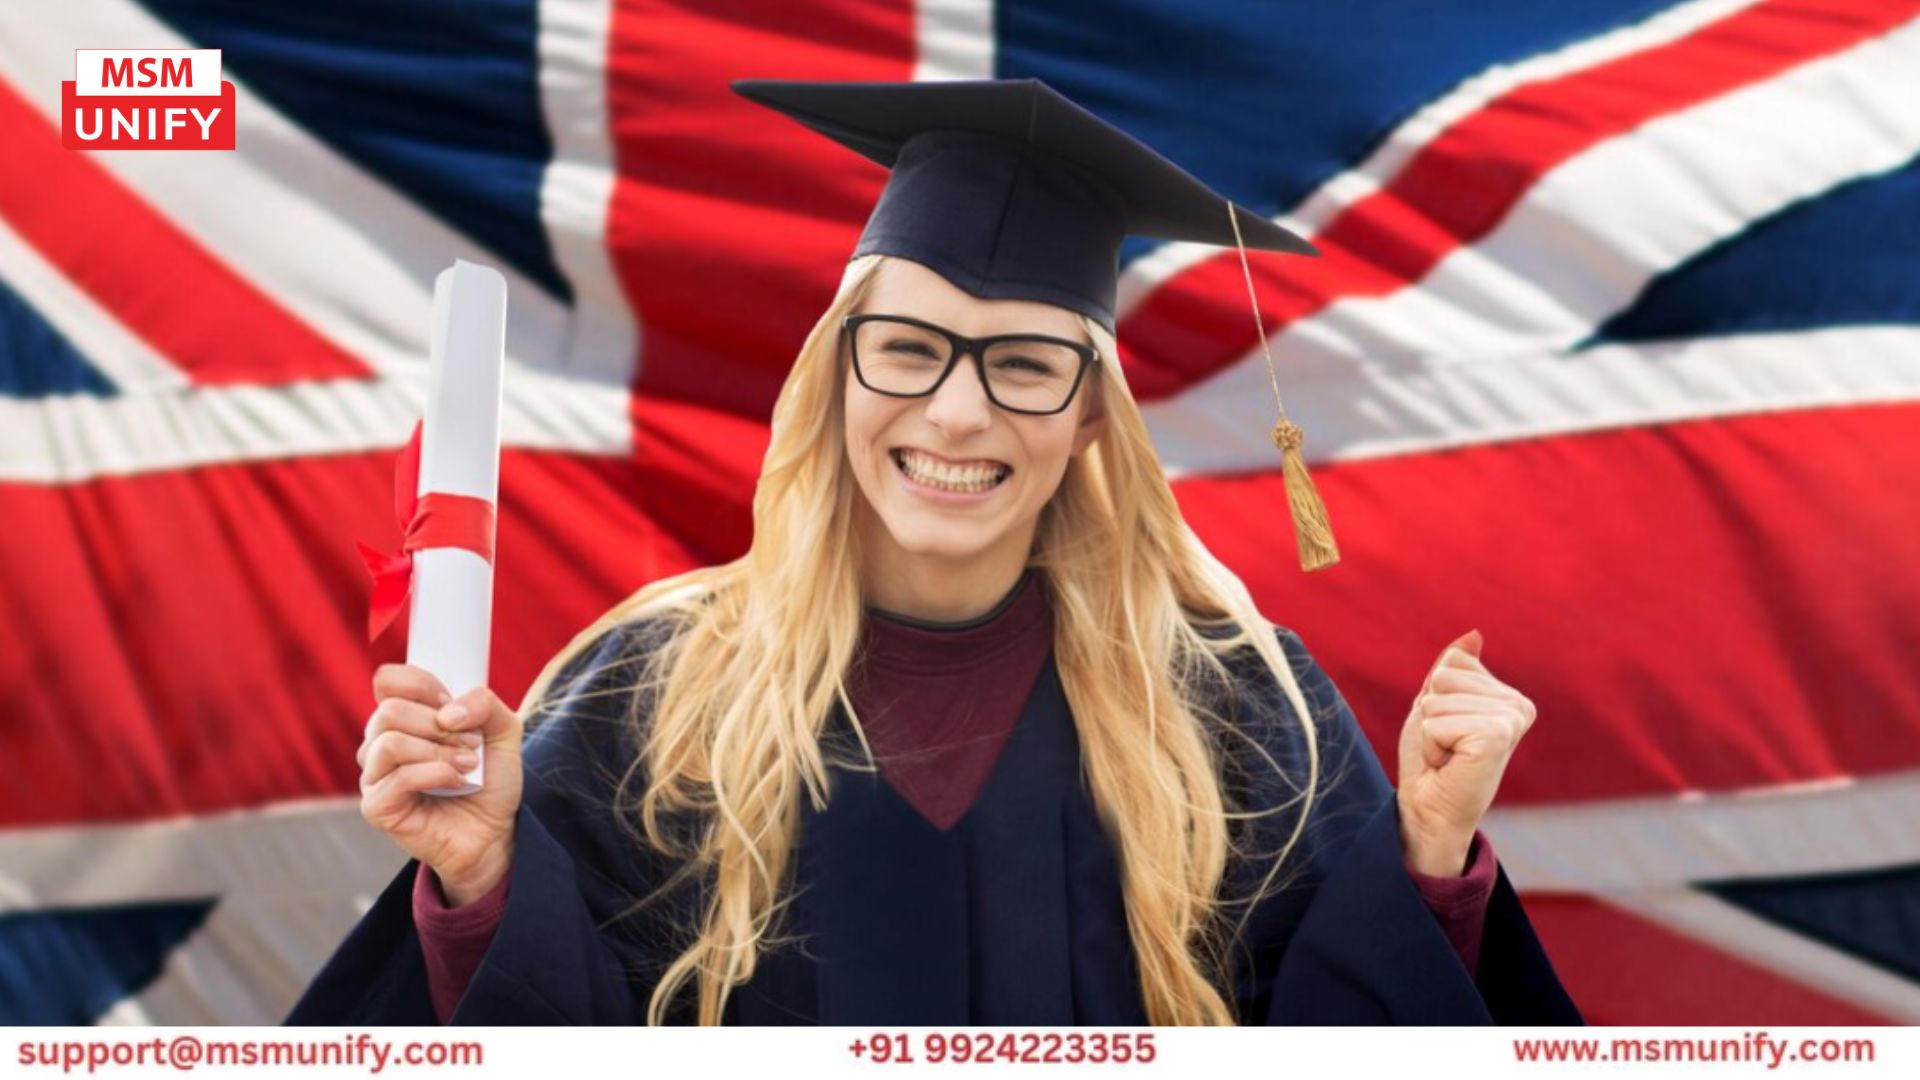 Elevate your academic journey to <a href="https://www.msmunify.com/study-in-uk/">study in the UK</a>—a gateway to unparalleled education and a future filled with accomplishment! Explore a wealth of knowledge and skills that open doors to endless possibilities.

